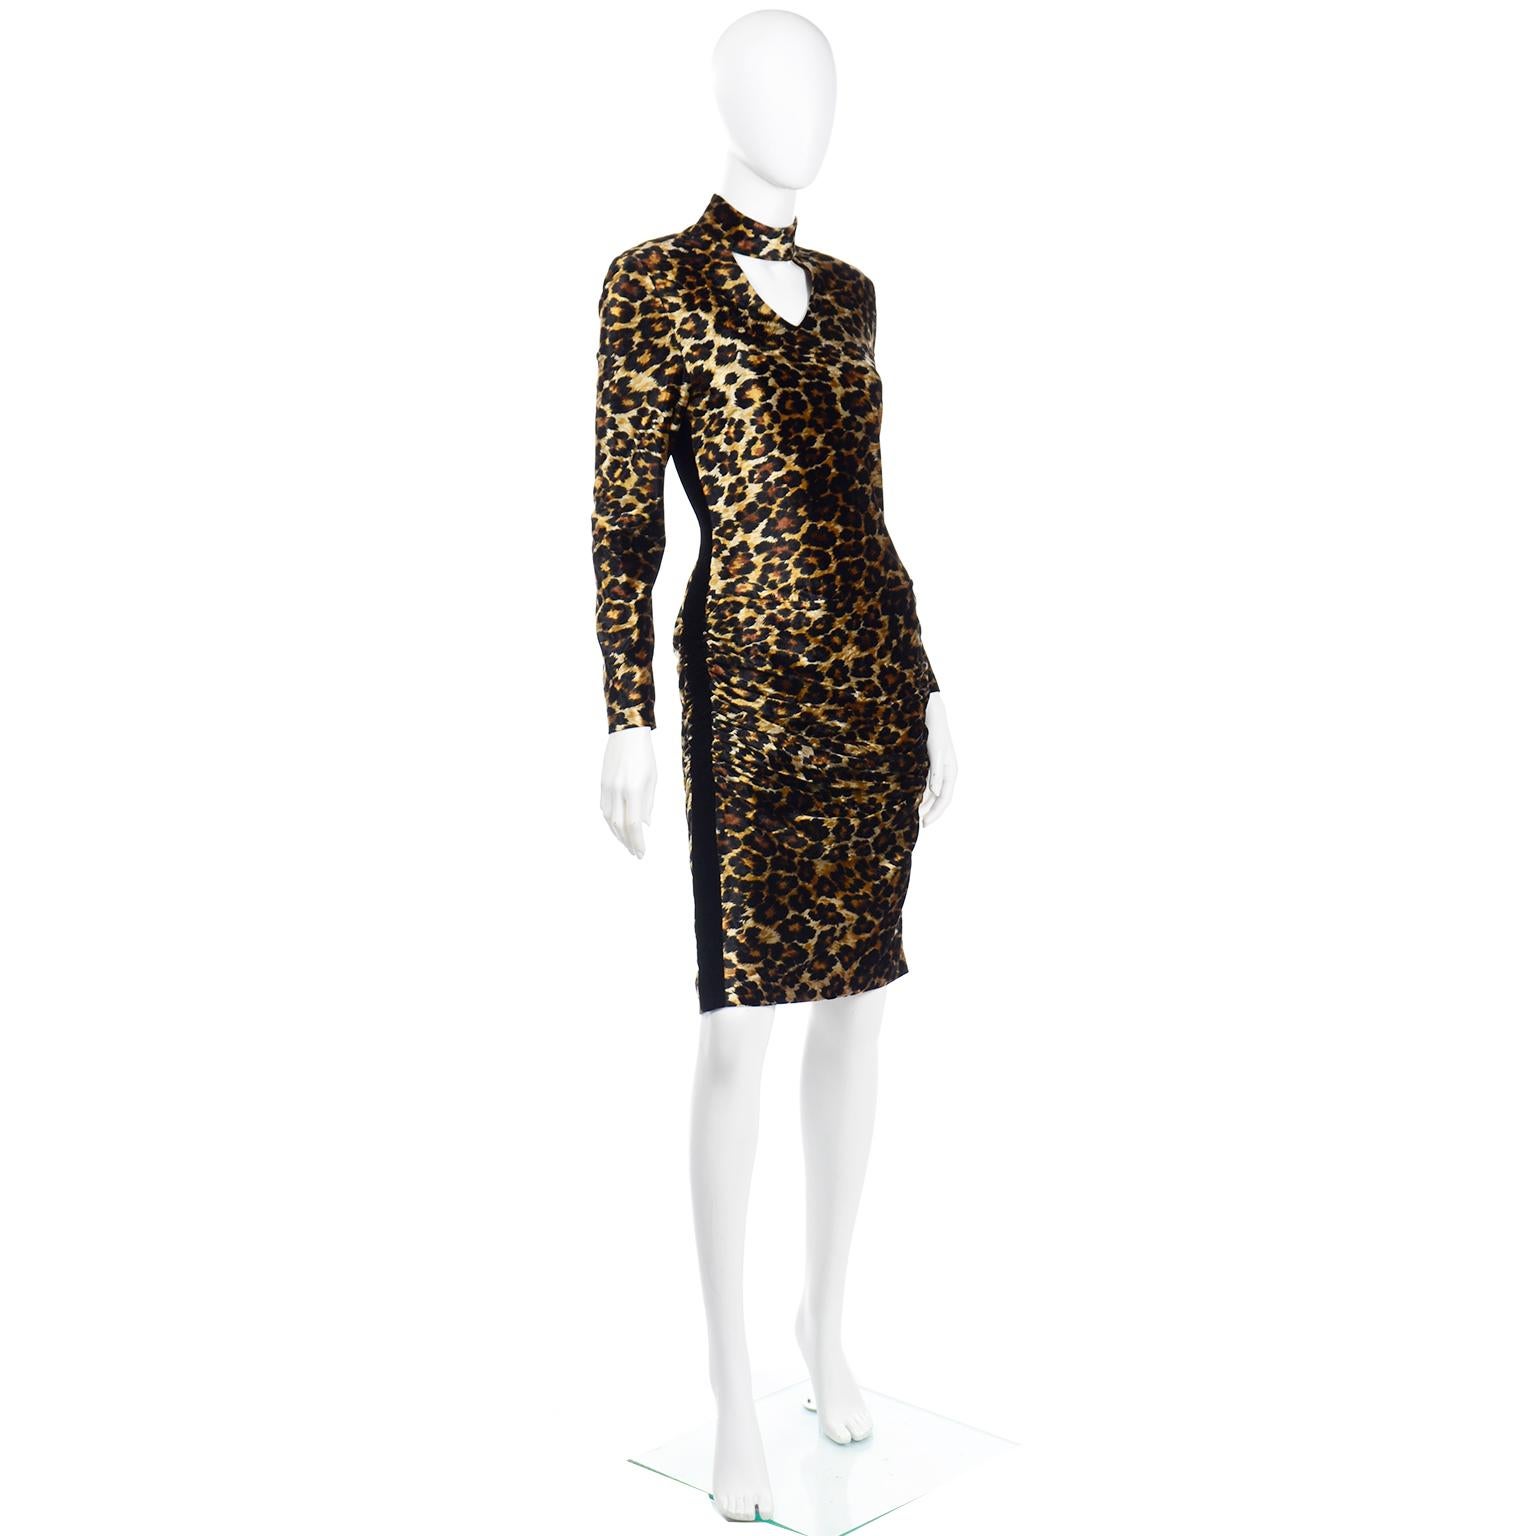 Fall Winter 1988/89 Patrick Kelly Vintage Leopard Print Bodycon Runway Dress In Excellent Condition For Sale In Portland, OR